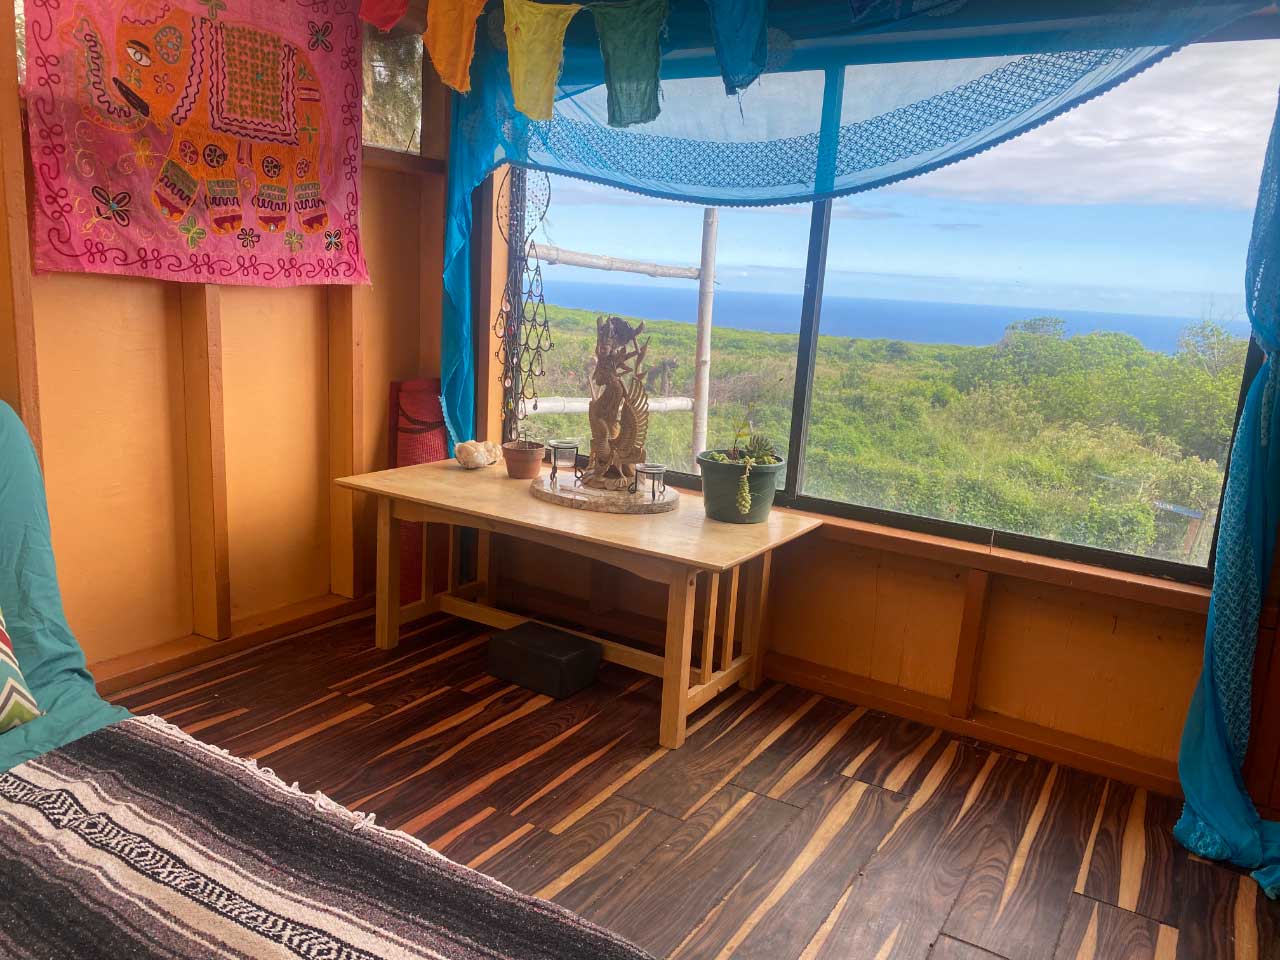 Meditation Nook View Looking Out